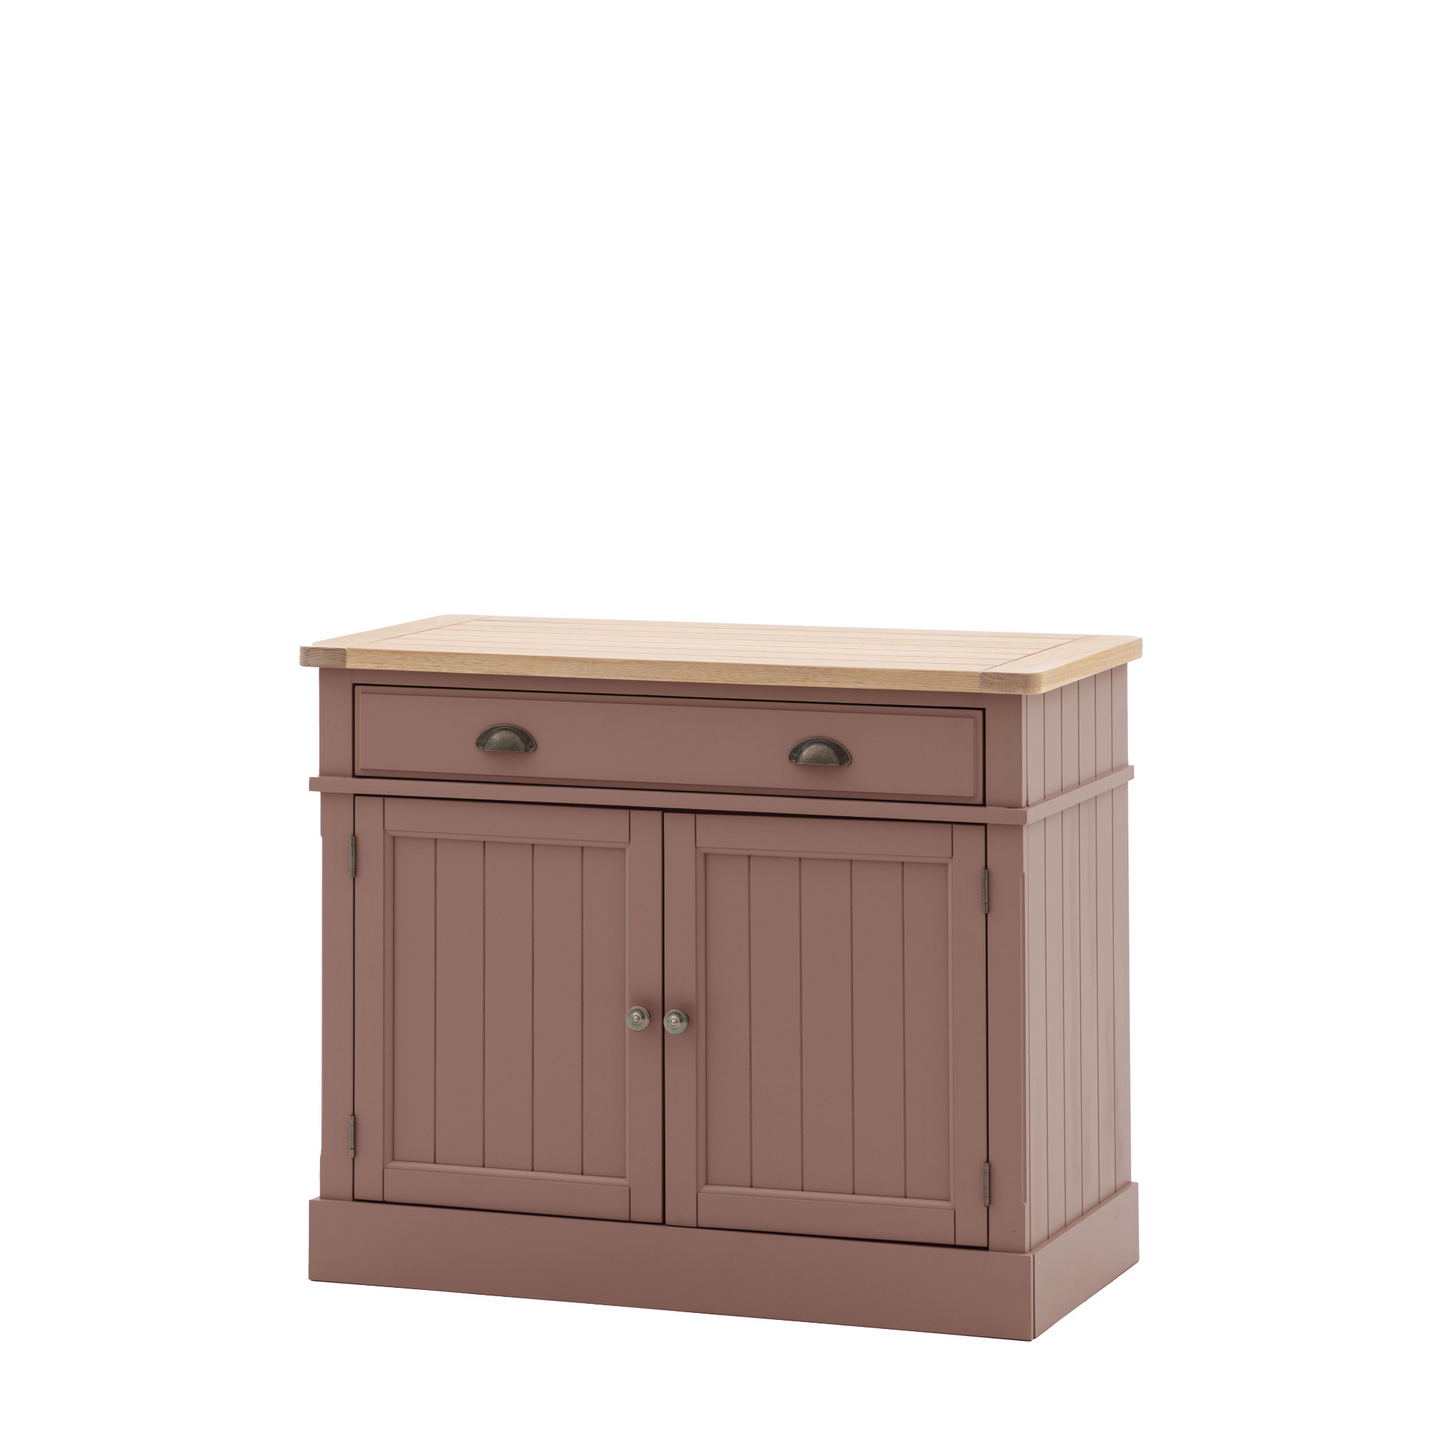 A Buckland 2 Door 1 Drawer Sideboard in Clay by Kikiathome.co.uk, perfect for interior decor and home furniture.